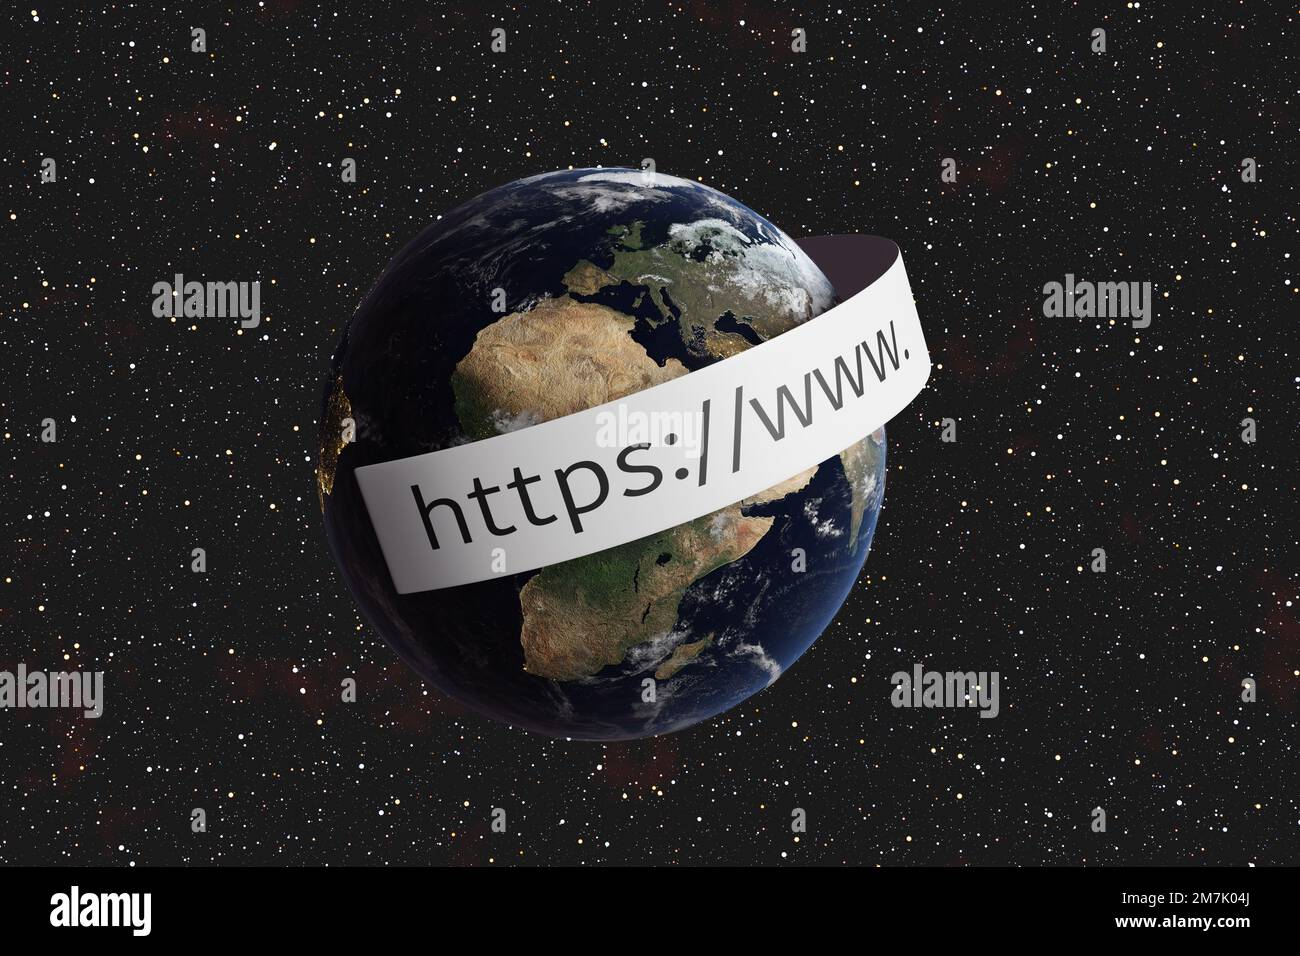 Realistic earth wrapped with a paper slip showing https and www on galaxy background.Concept of the Internet, WWW, and SSL secure web connection Stock Photo